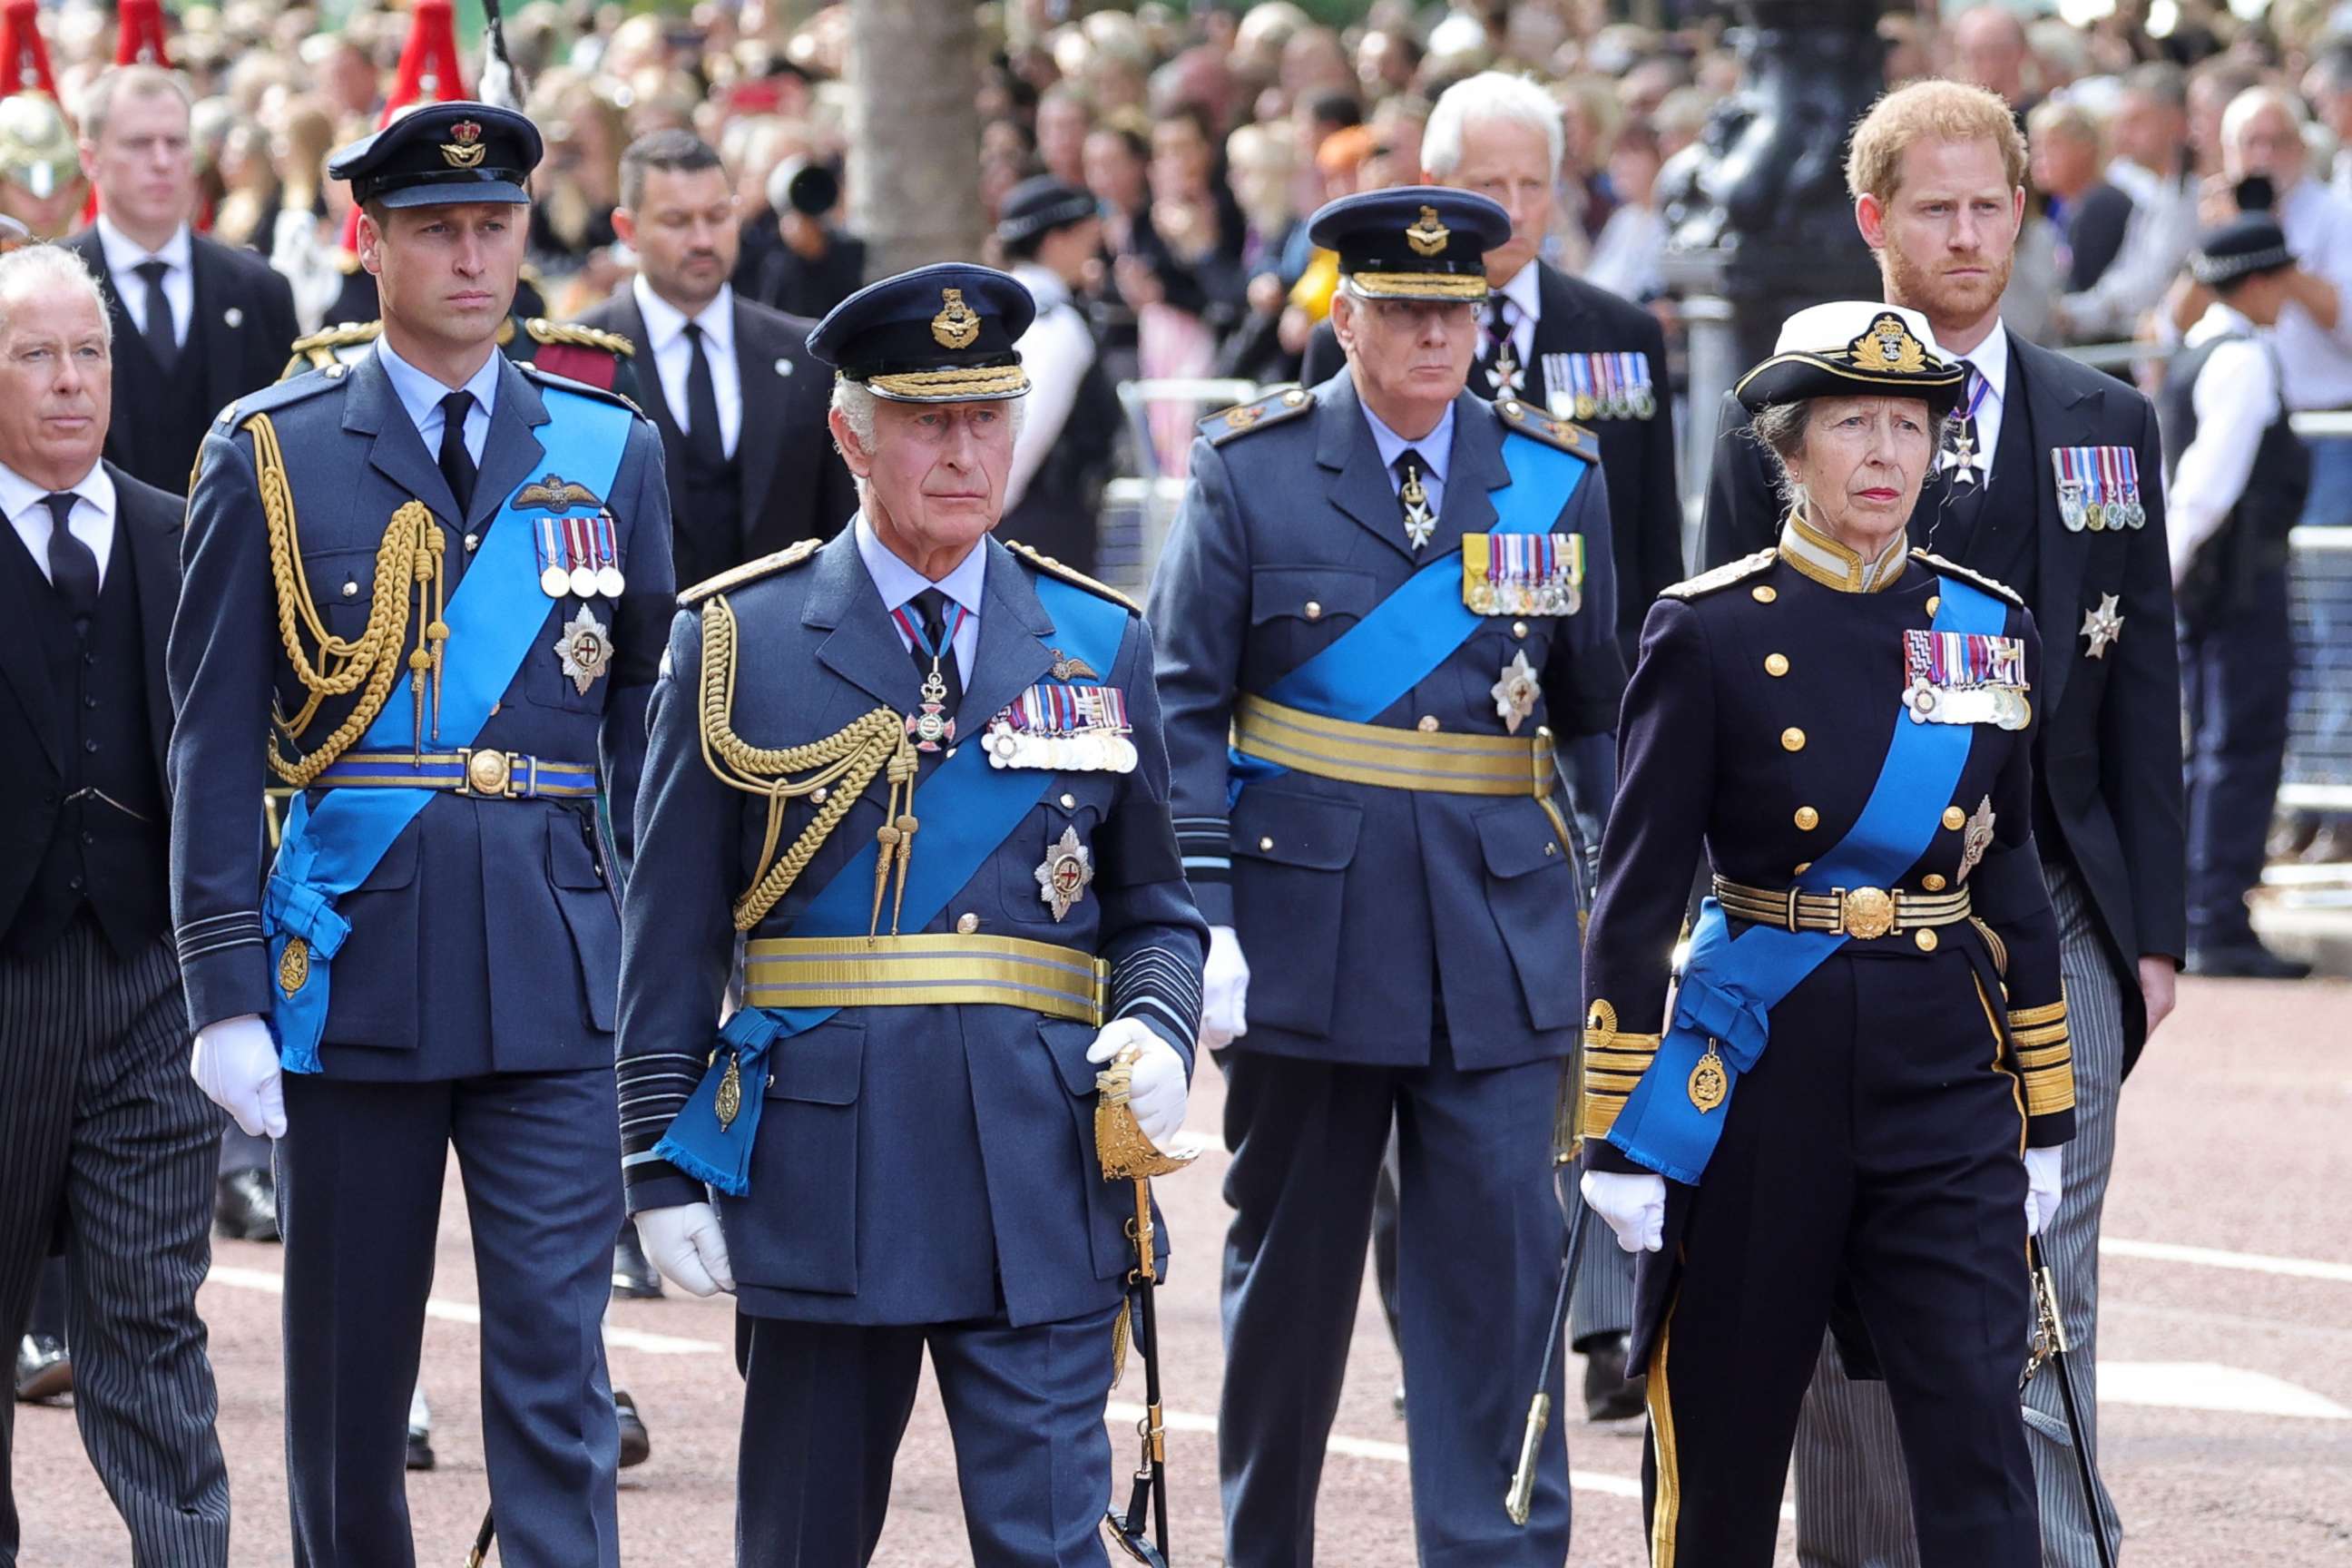 Prince William, King Charles III, Prince Richard, Duke of Gloucester, Princess Anne, Princess Royal and Prince Harry, Duke of Sussex walk behind the coffin during the procession for the Lying-in State of Queen Elizabeth II on Sept. 14, 2022 in London.